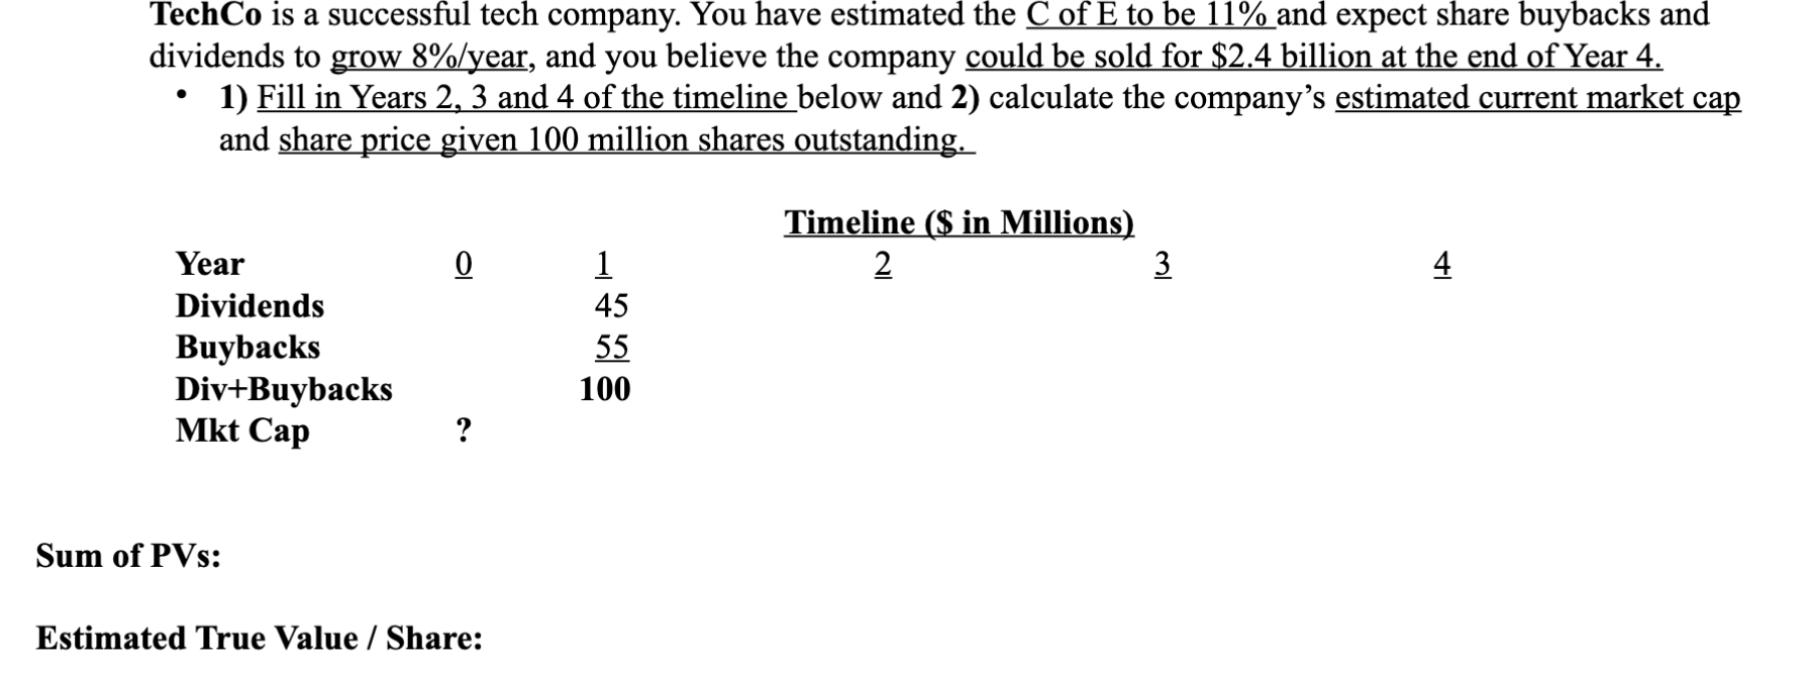 TechCo is a successful tech company. You have estimated the C of E to be 11% and expect share buybacks and